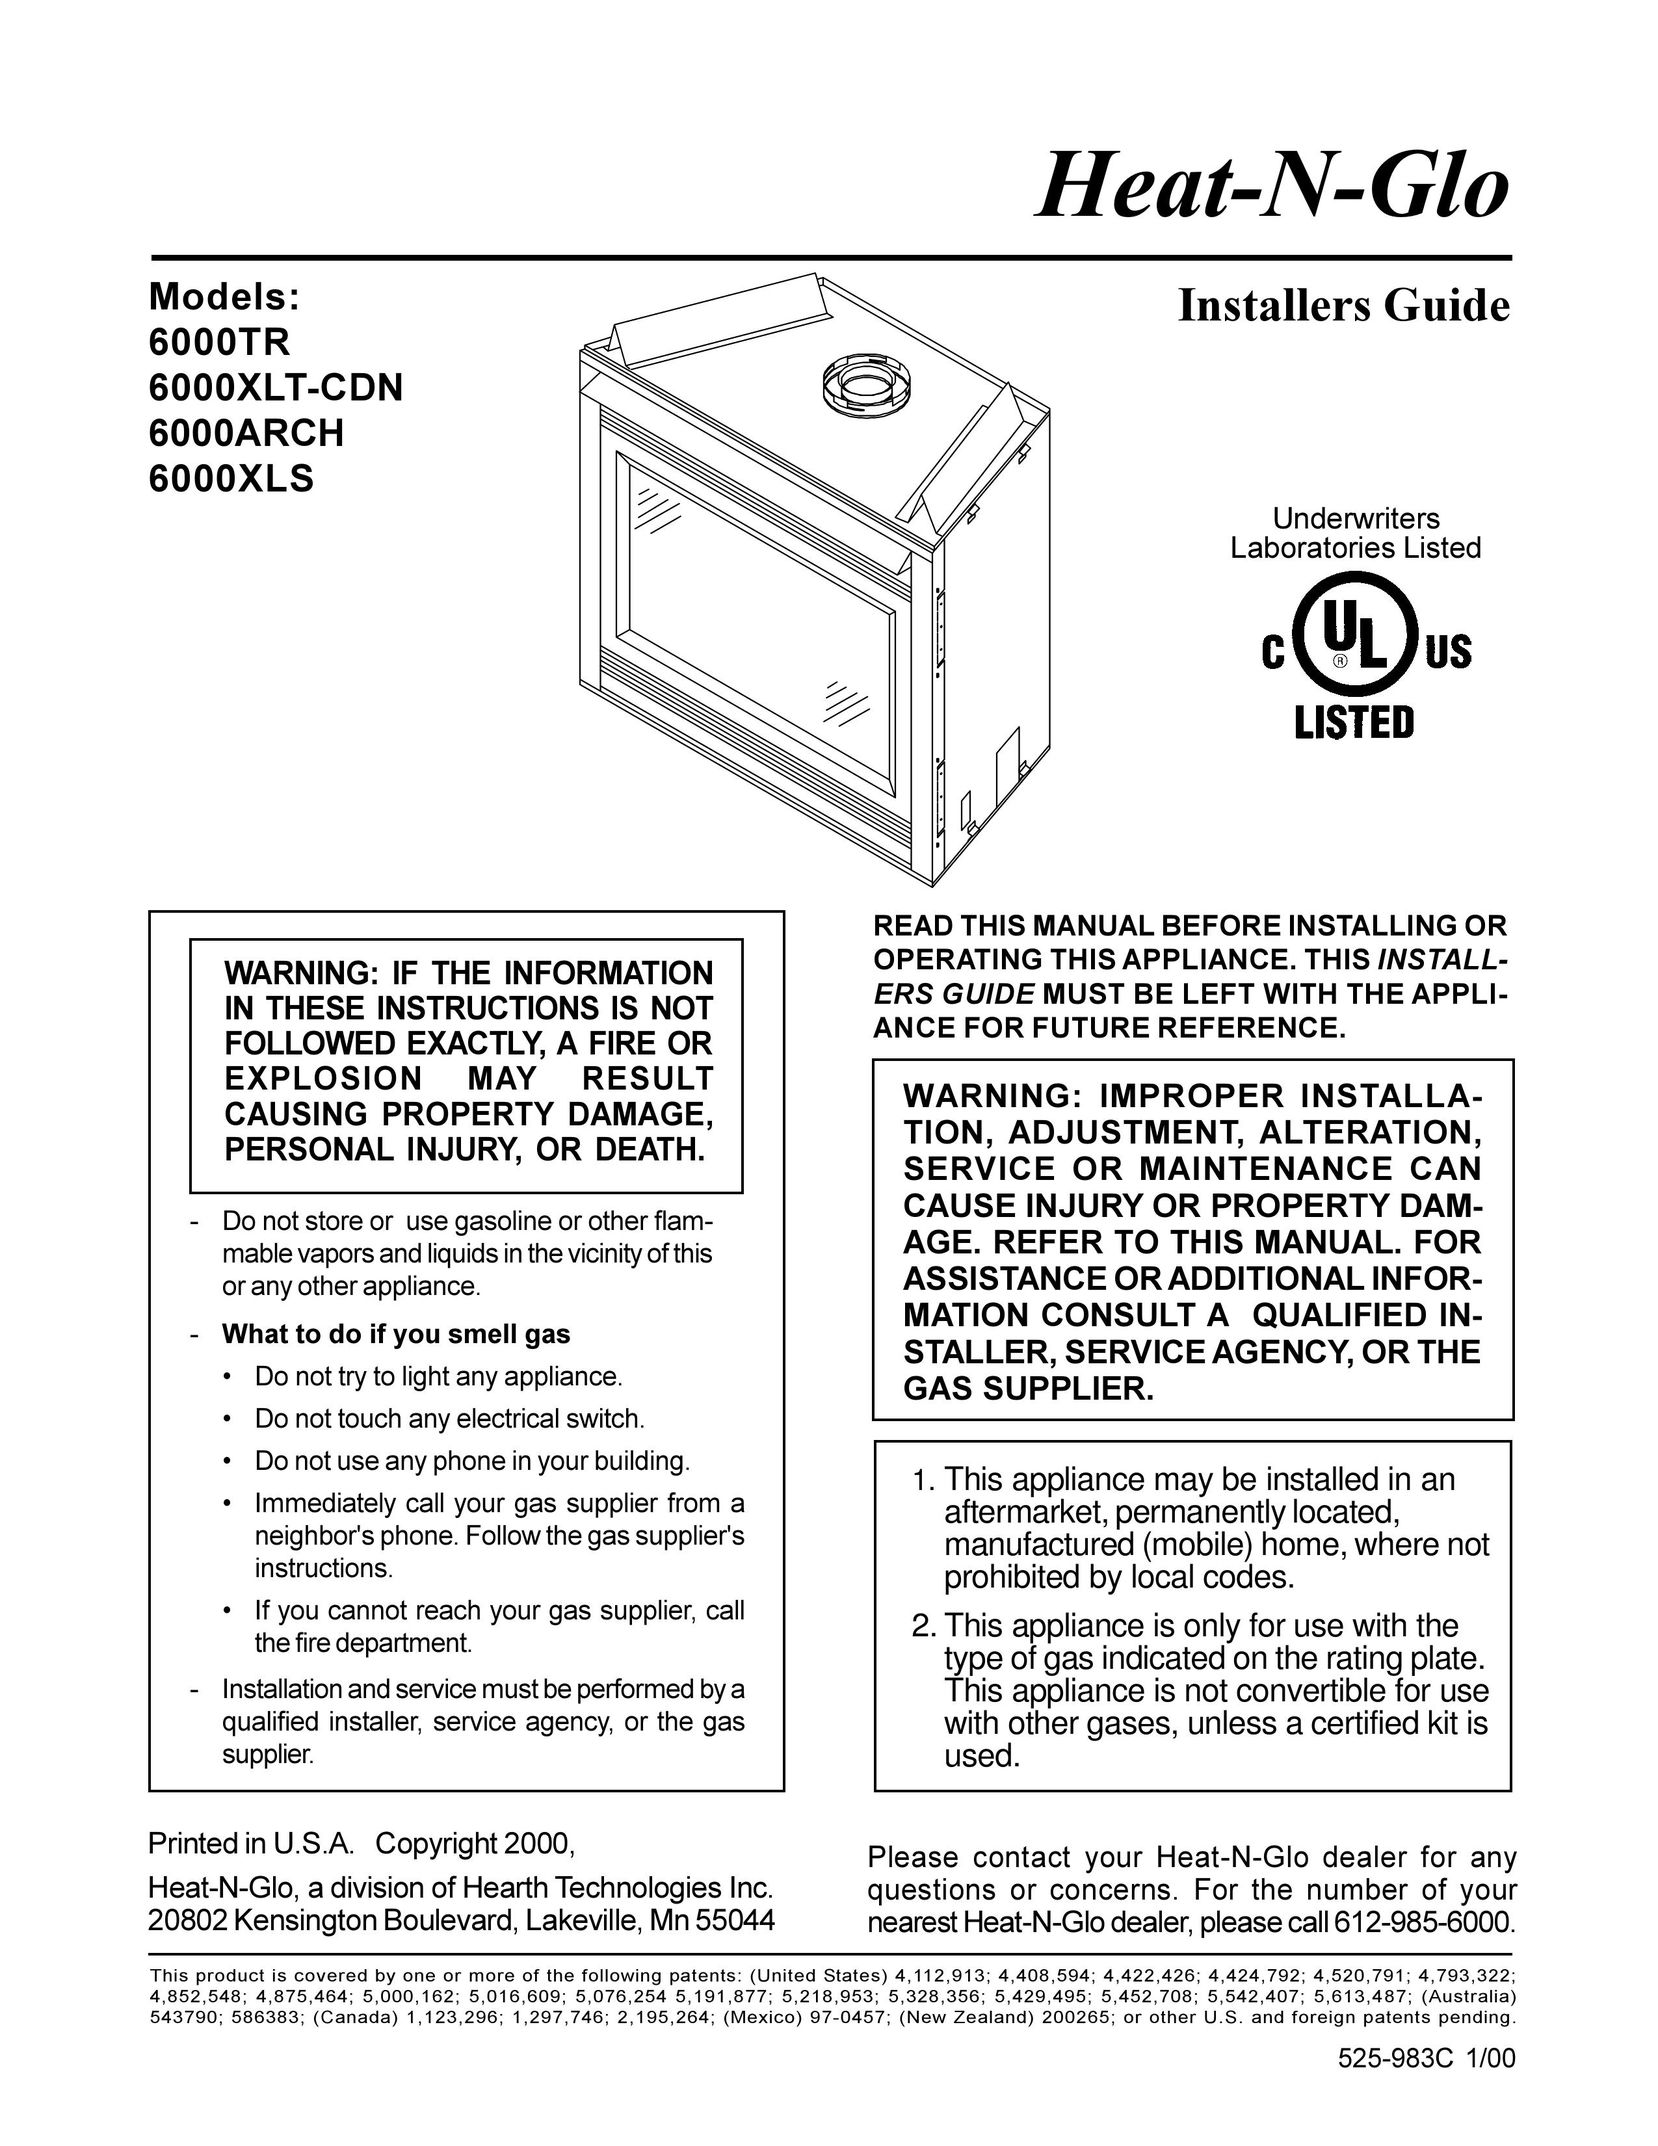 Heat & Glo LifeStyle 6000XLS Indoor Fireplace User Manual